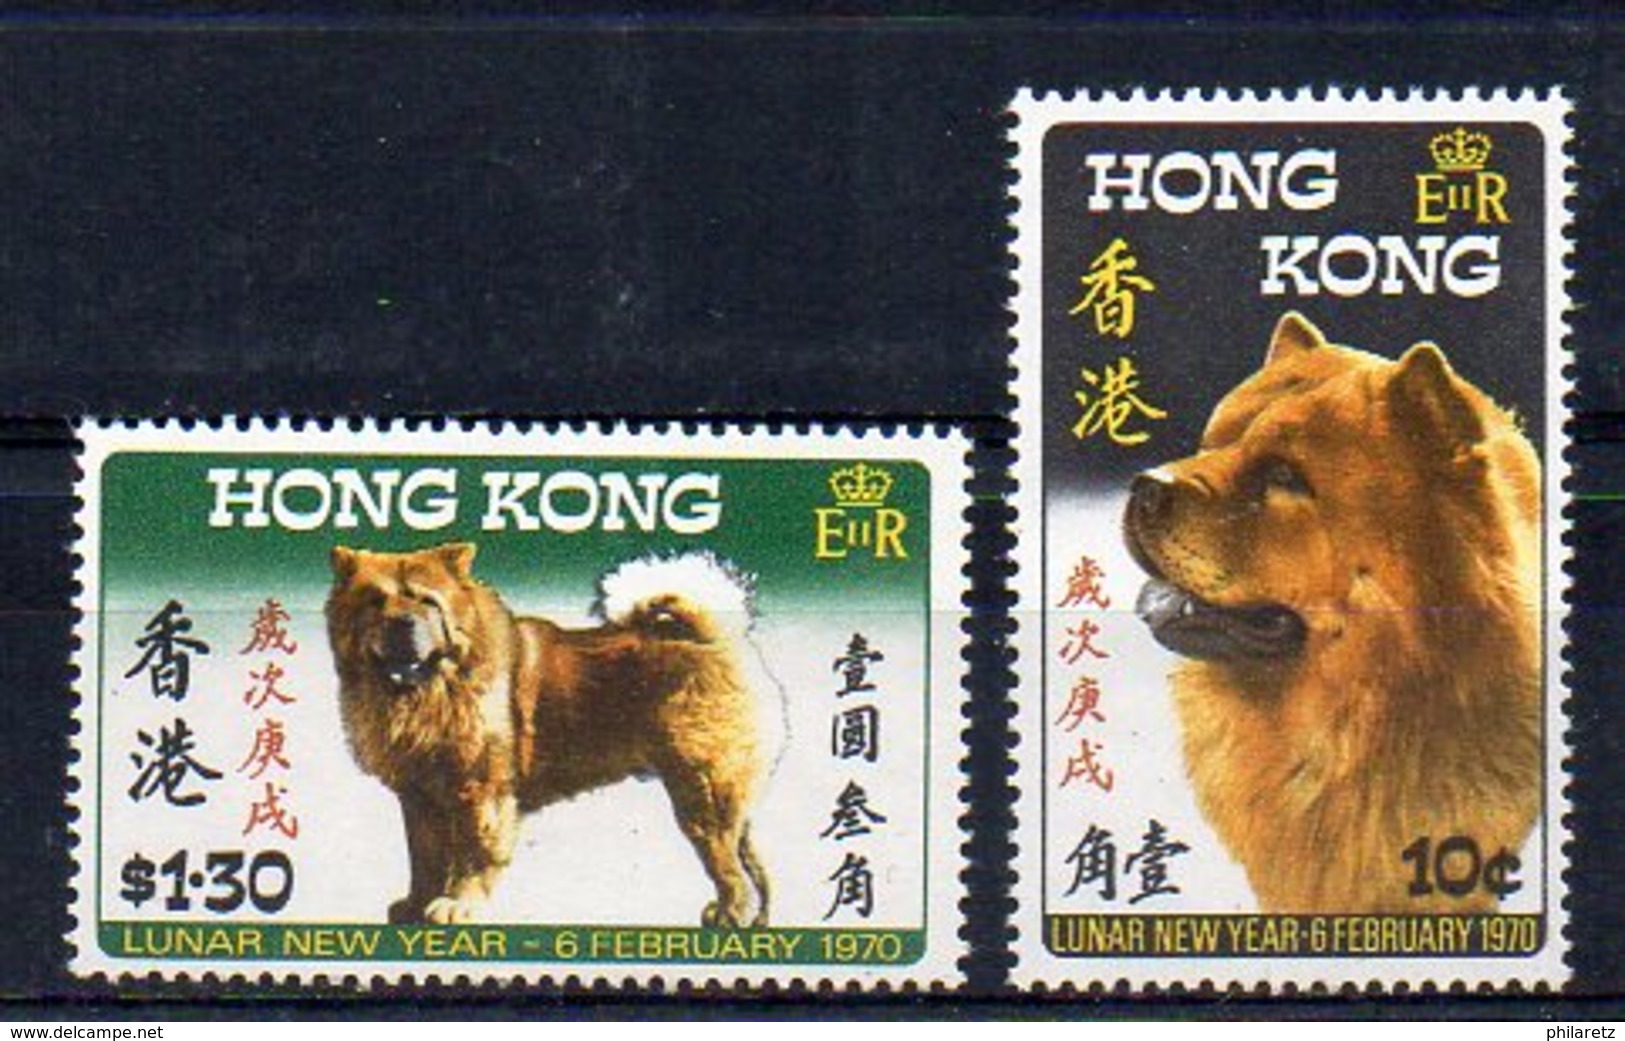 Hong Kong N° 244 Et 245 Neufs ** - Année Du Chien / Dog New Year - Cote (Y&T 2008) : 80€ - Unused Stamps